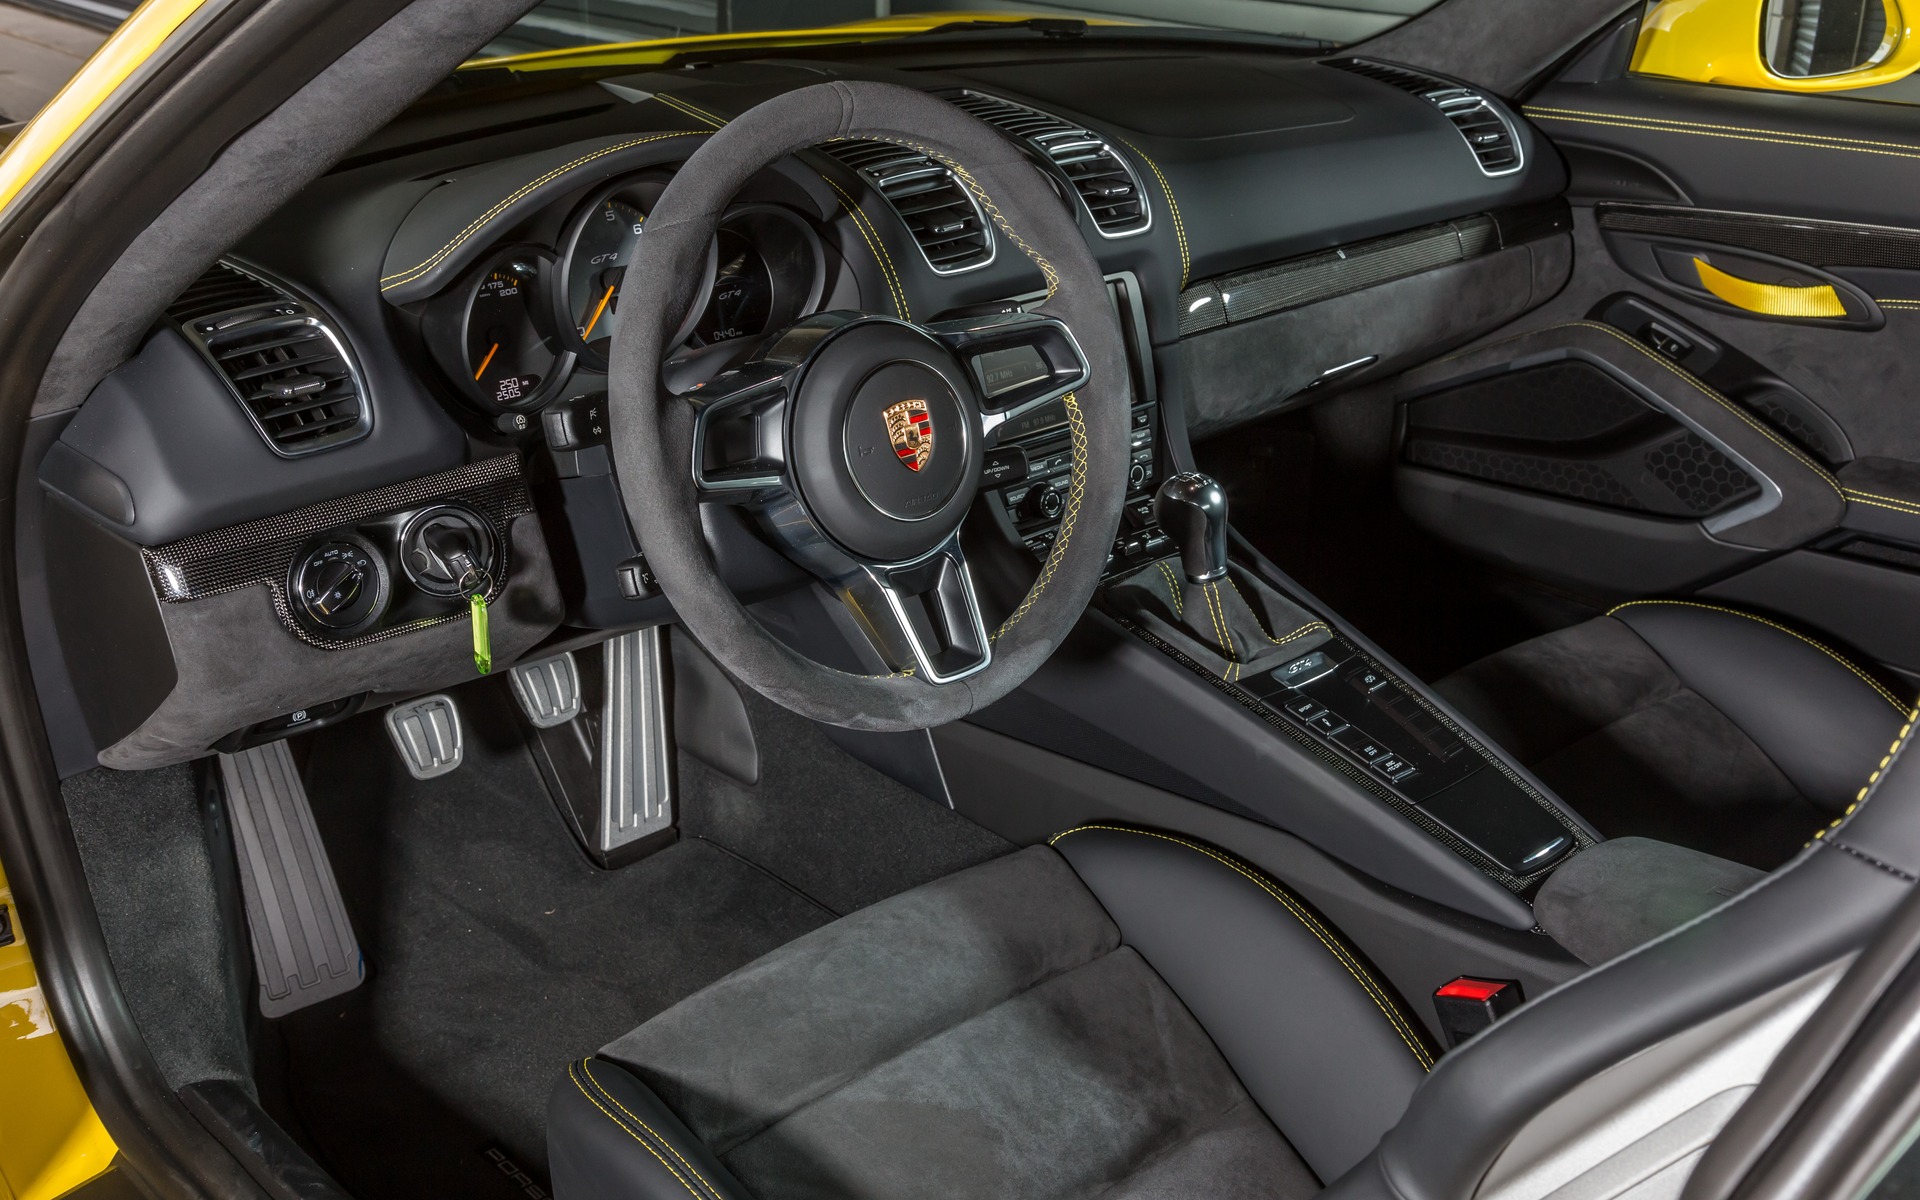 The GT4's cockpit looks designed for racing.